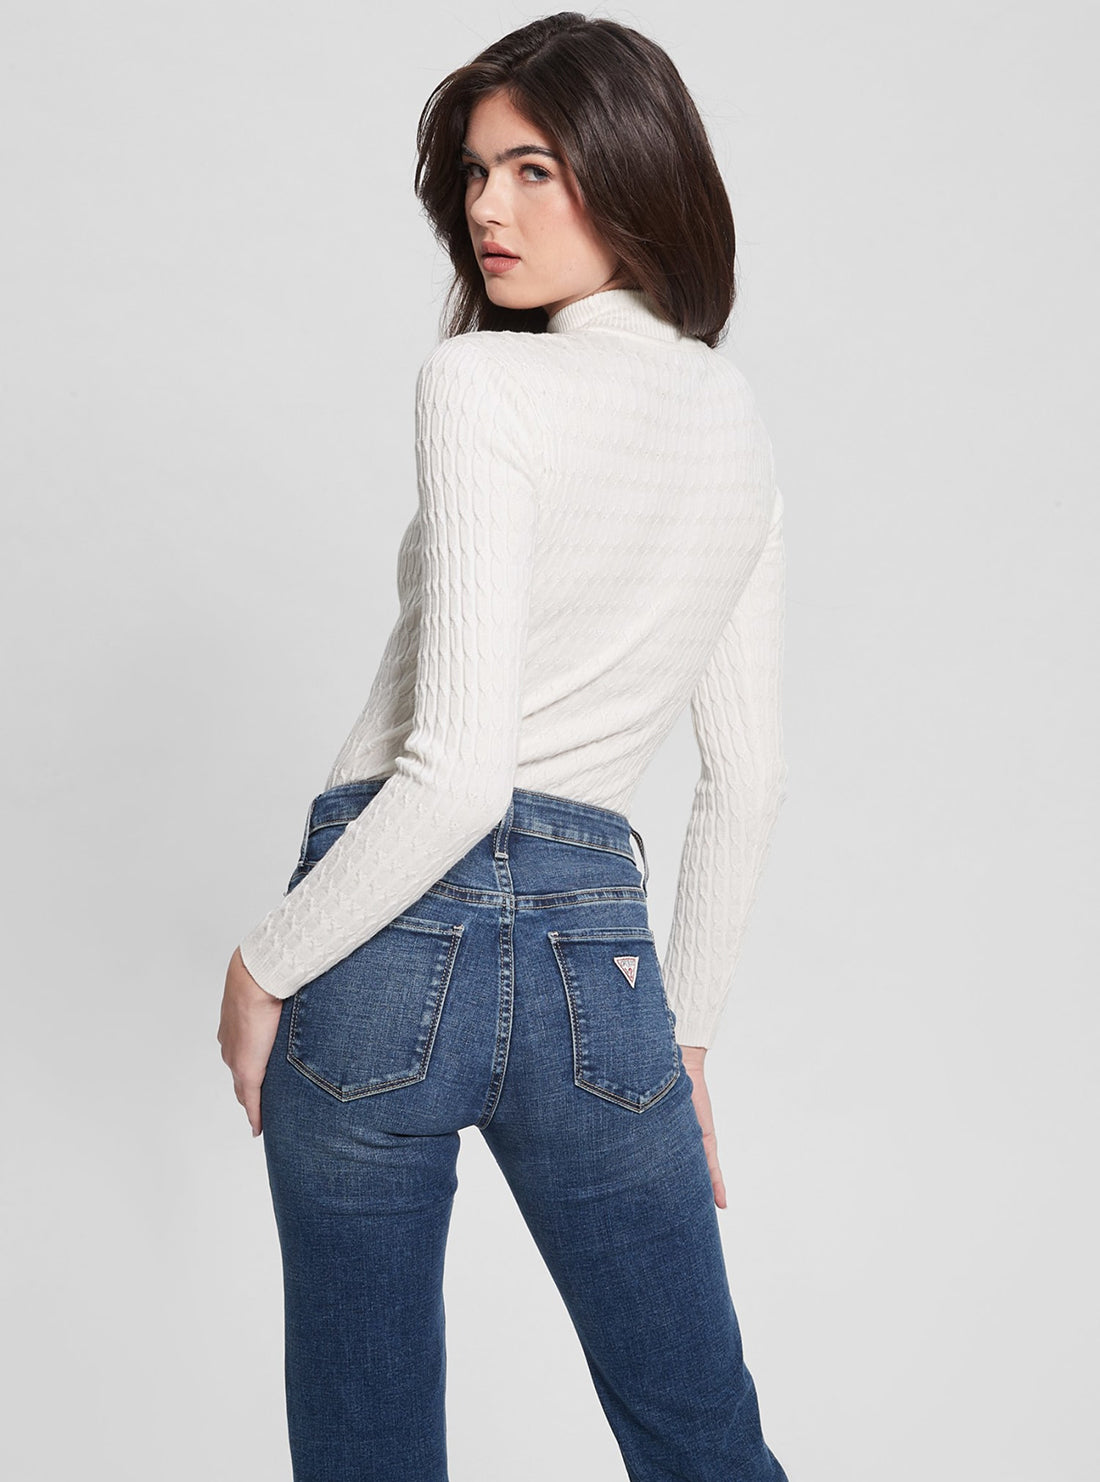 GUESS Eco White Mock Neck Nikki Knit Top back view